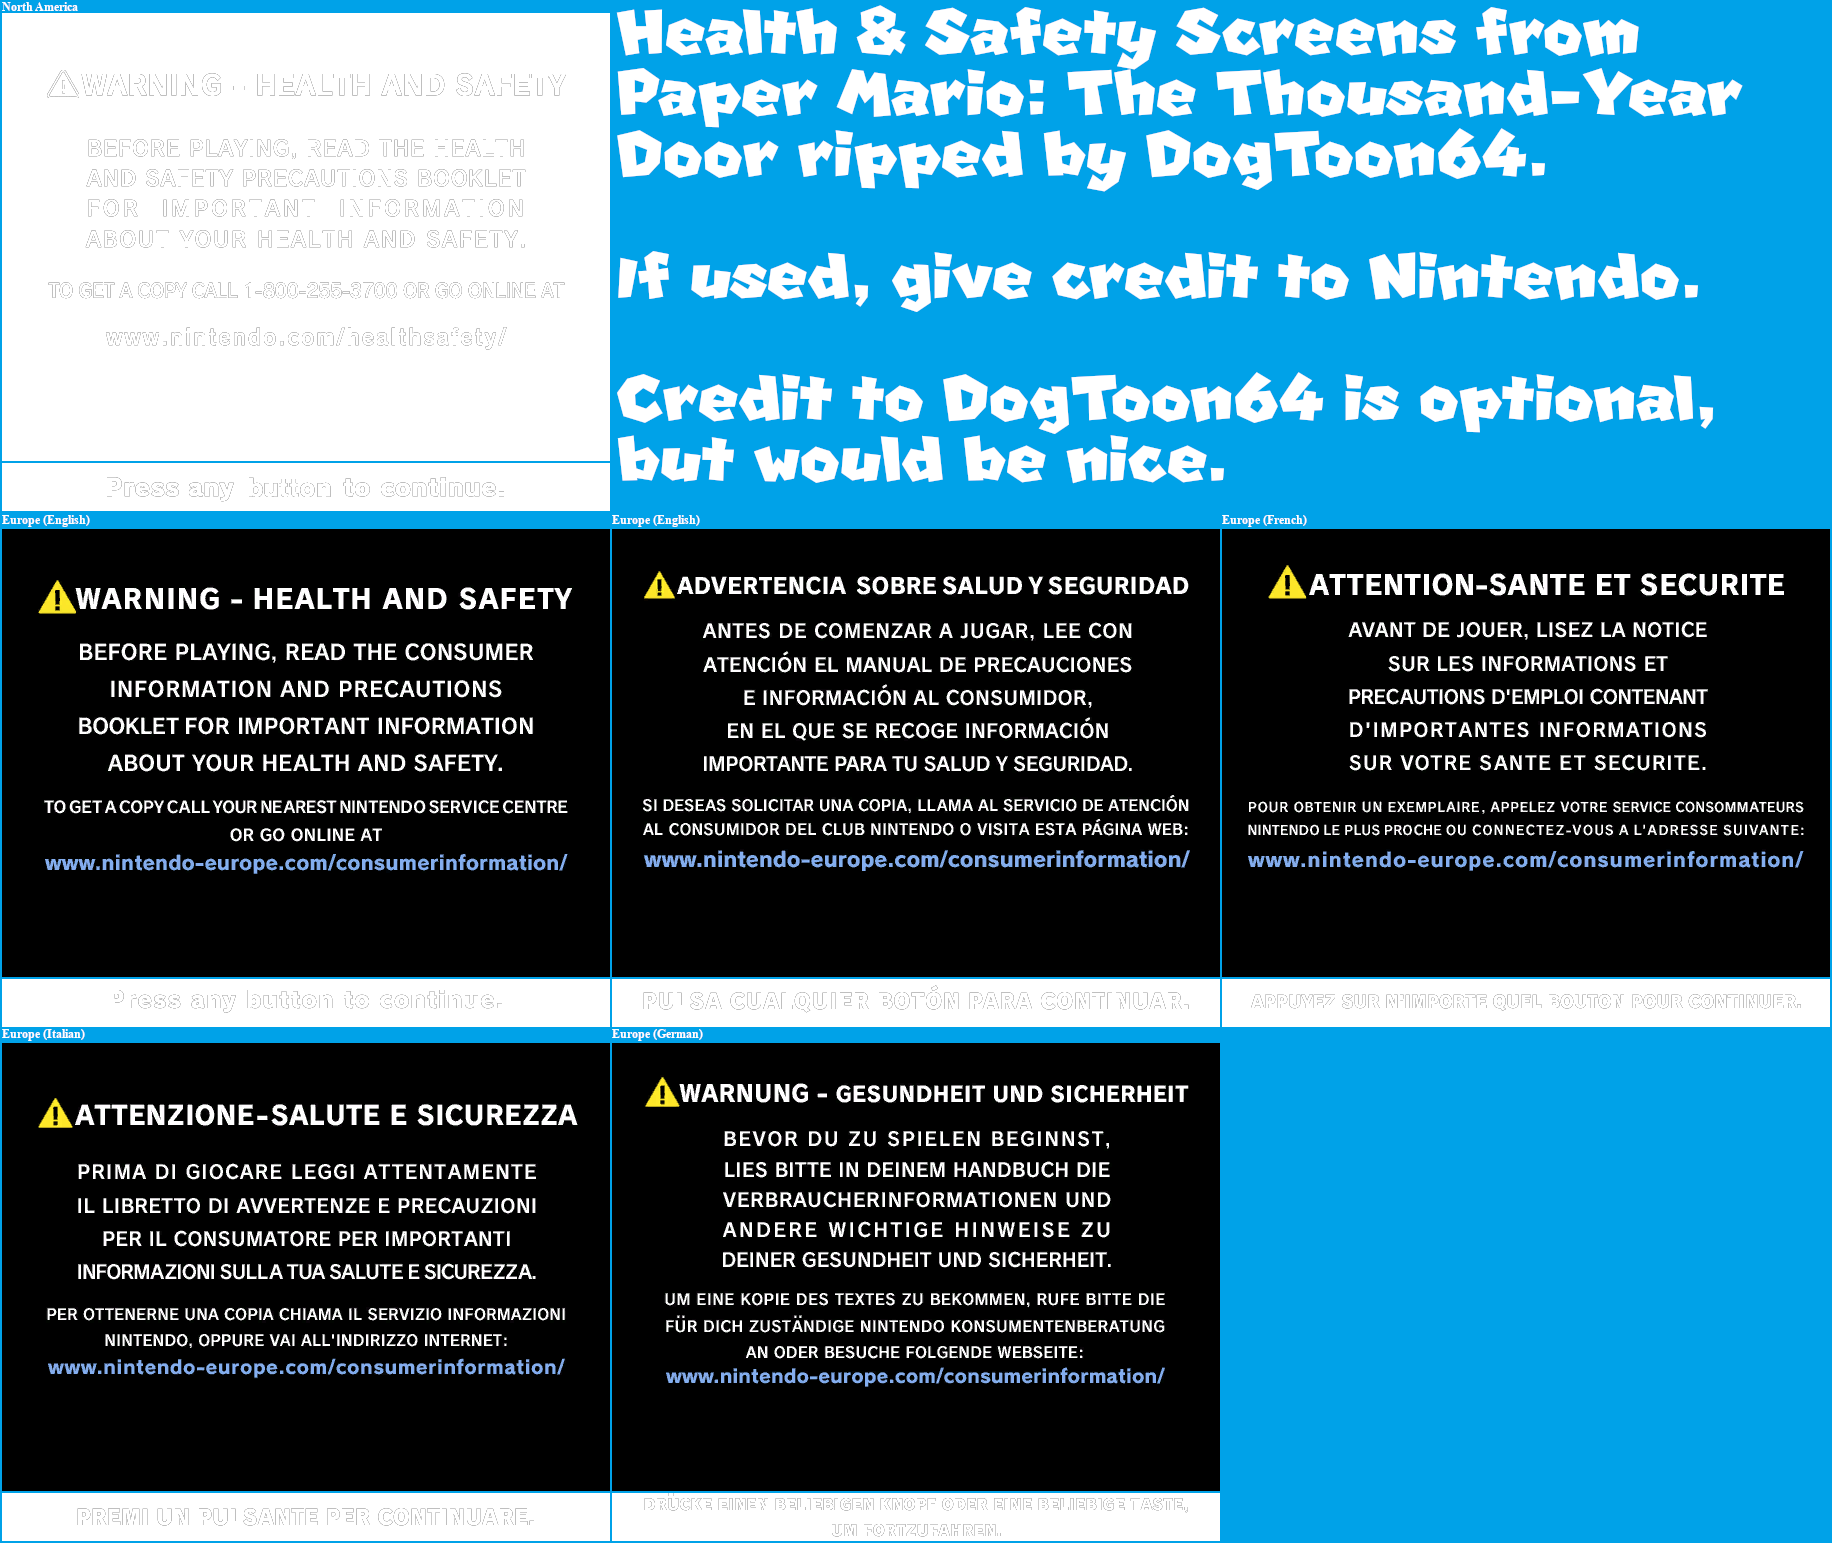 Paper Mario: The Thousand-Year Door - Health & Safety Screens